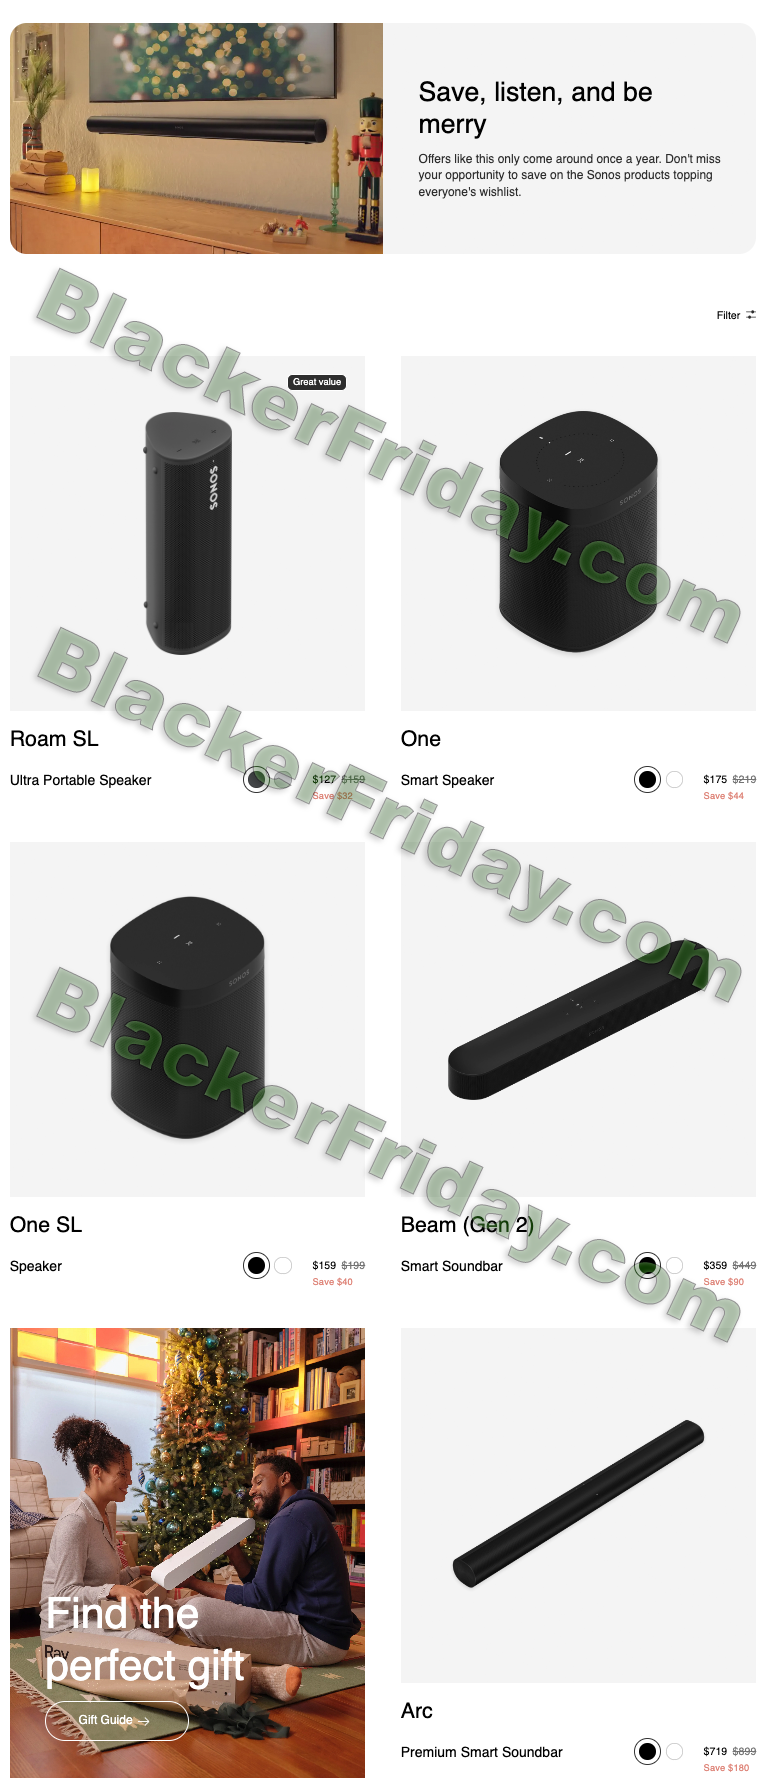 For en dagstur der tro What to expect at Sonos' Black Friday 2023 Sale - Blacker Friday